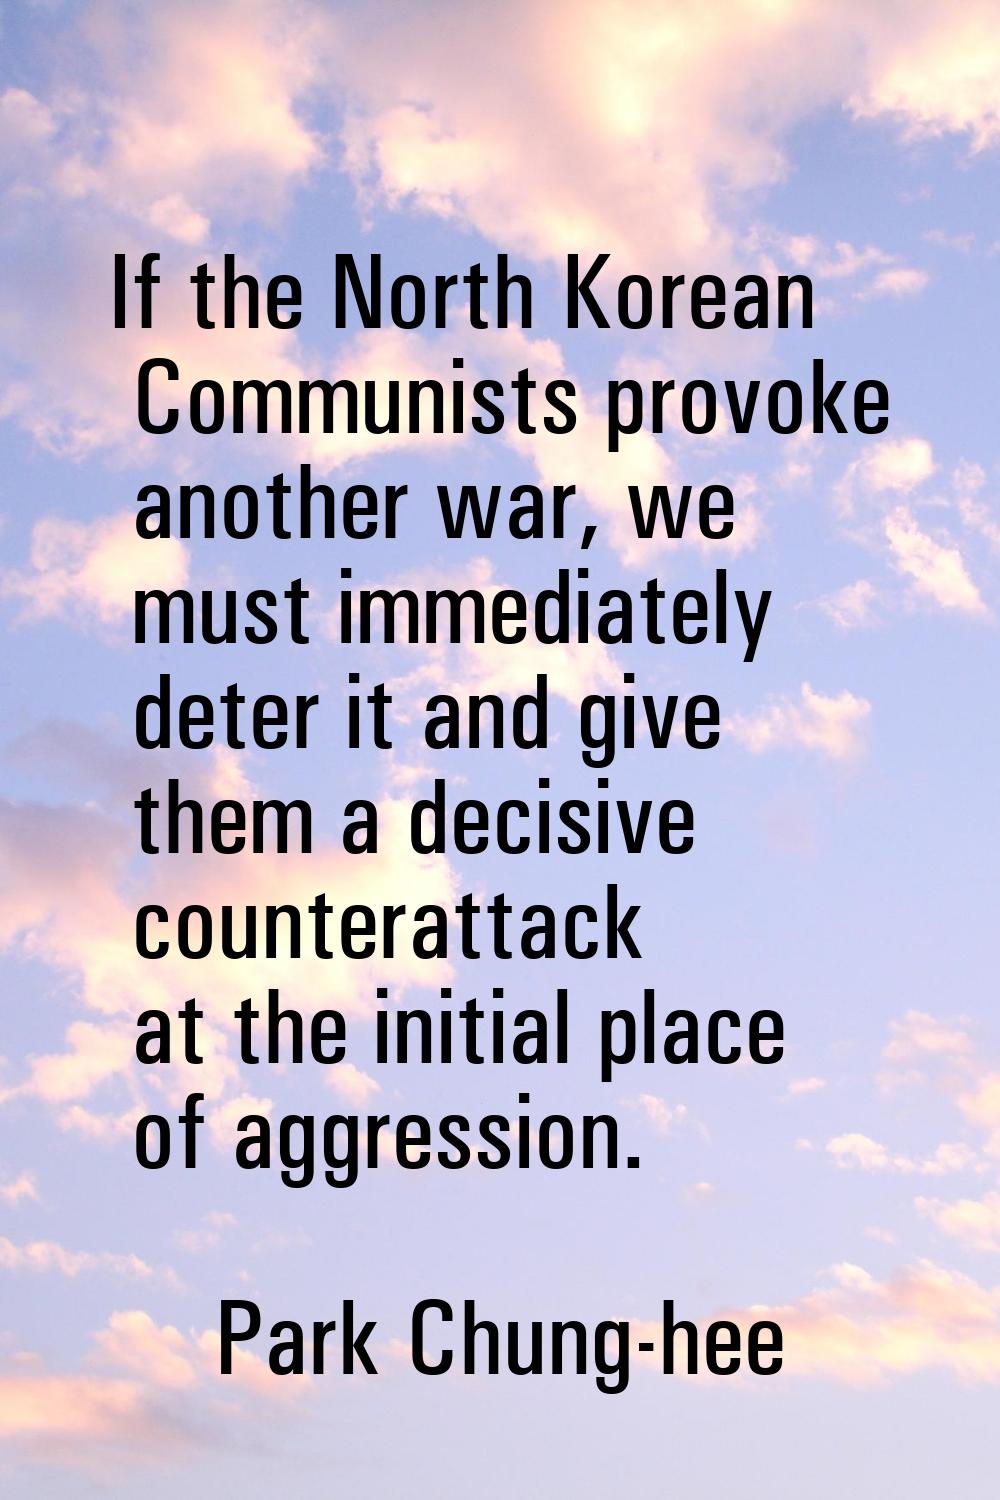 If the North Korean Communists provoke another war, we must immediately deter it and give them a de